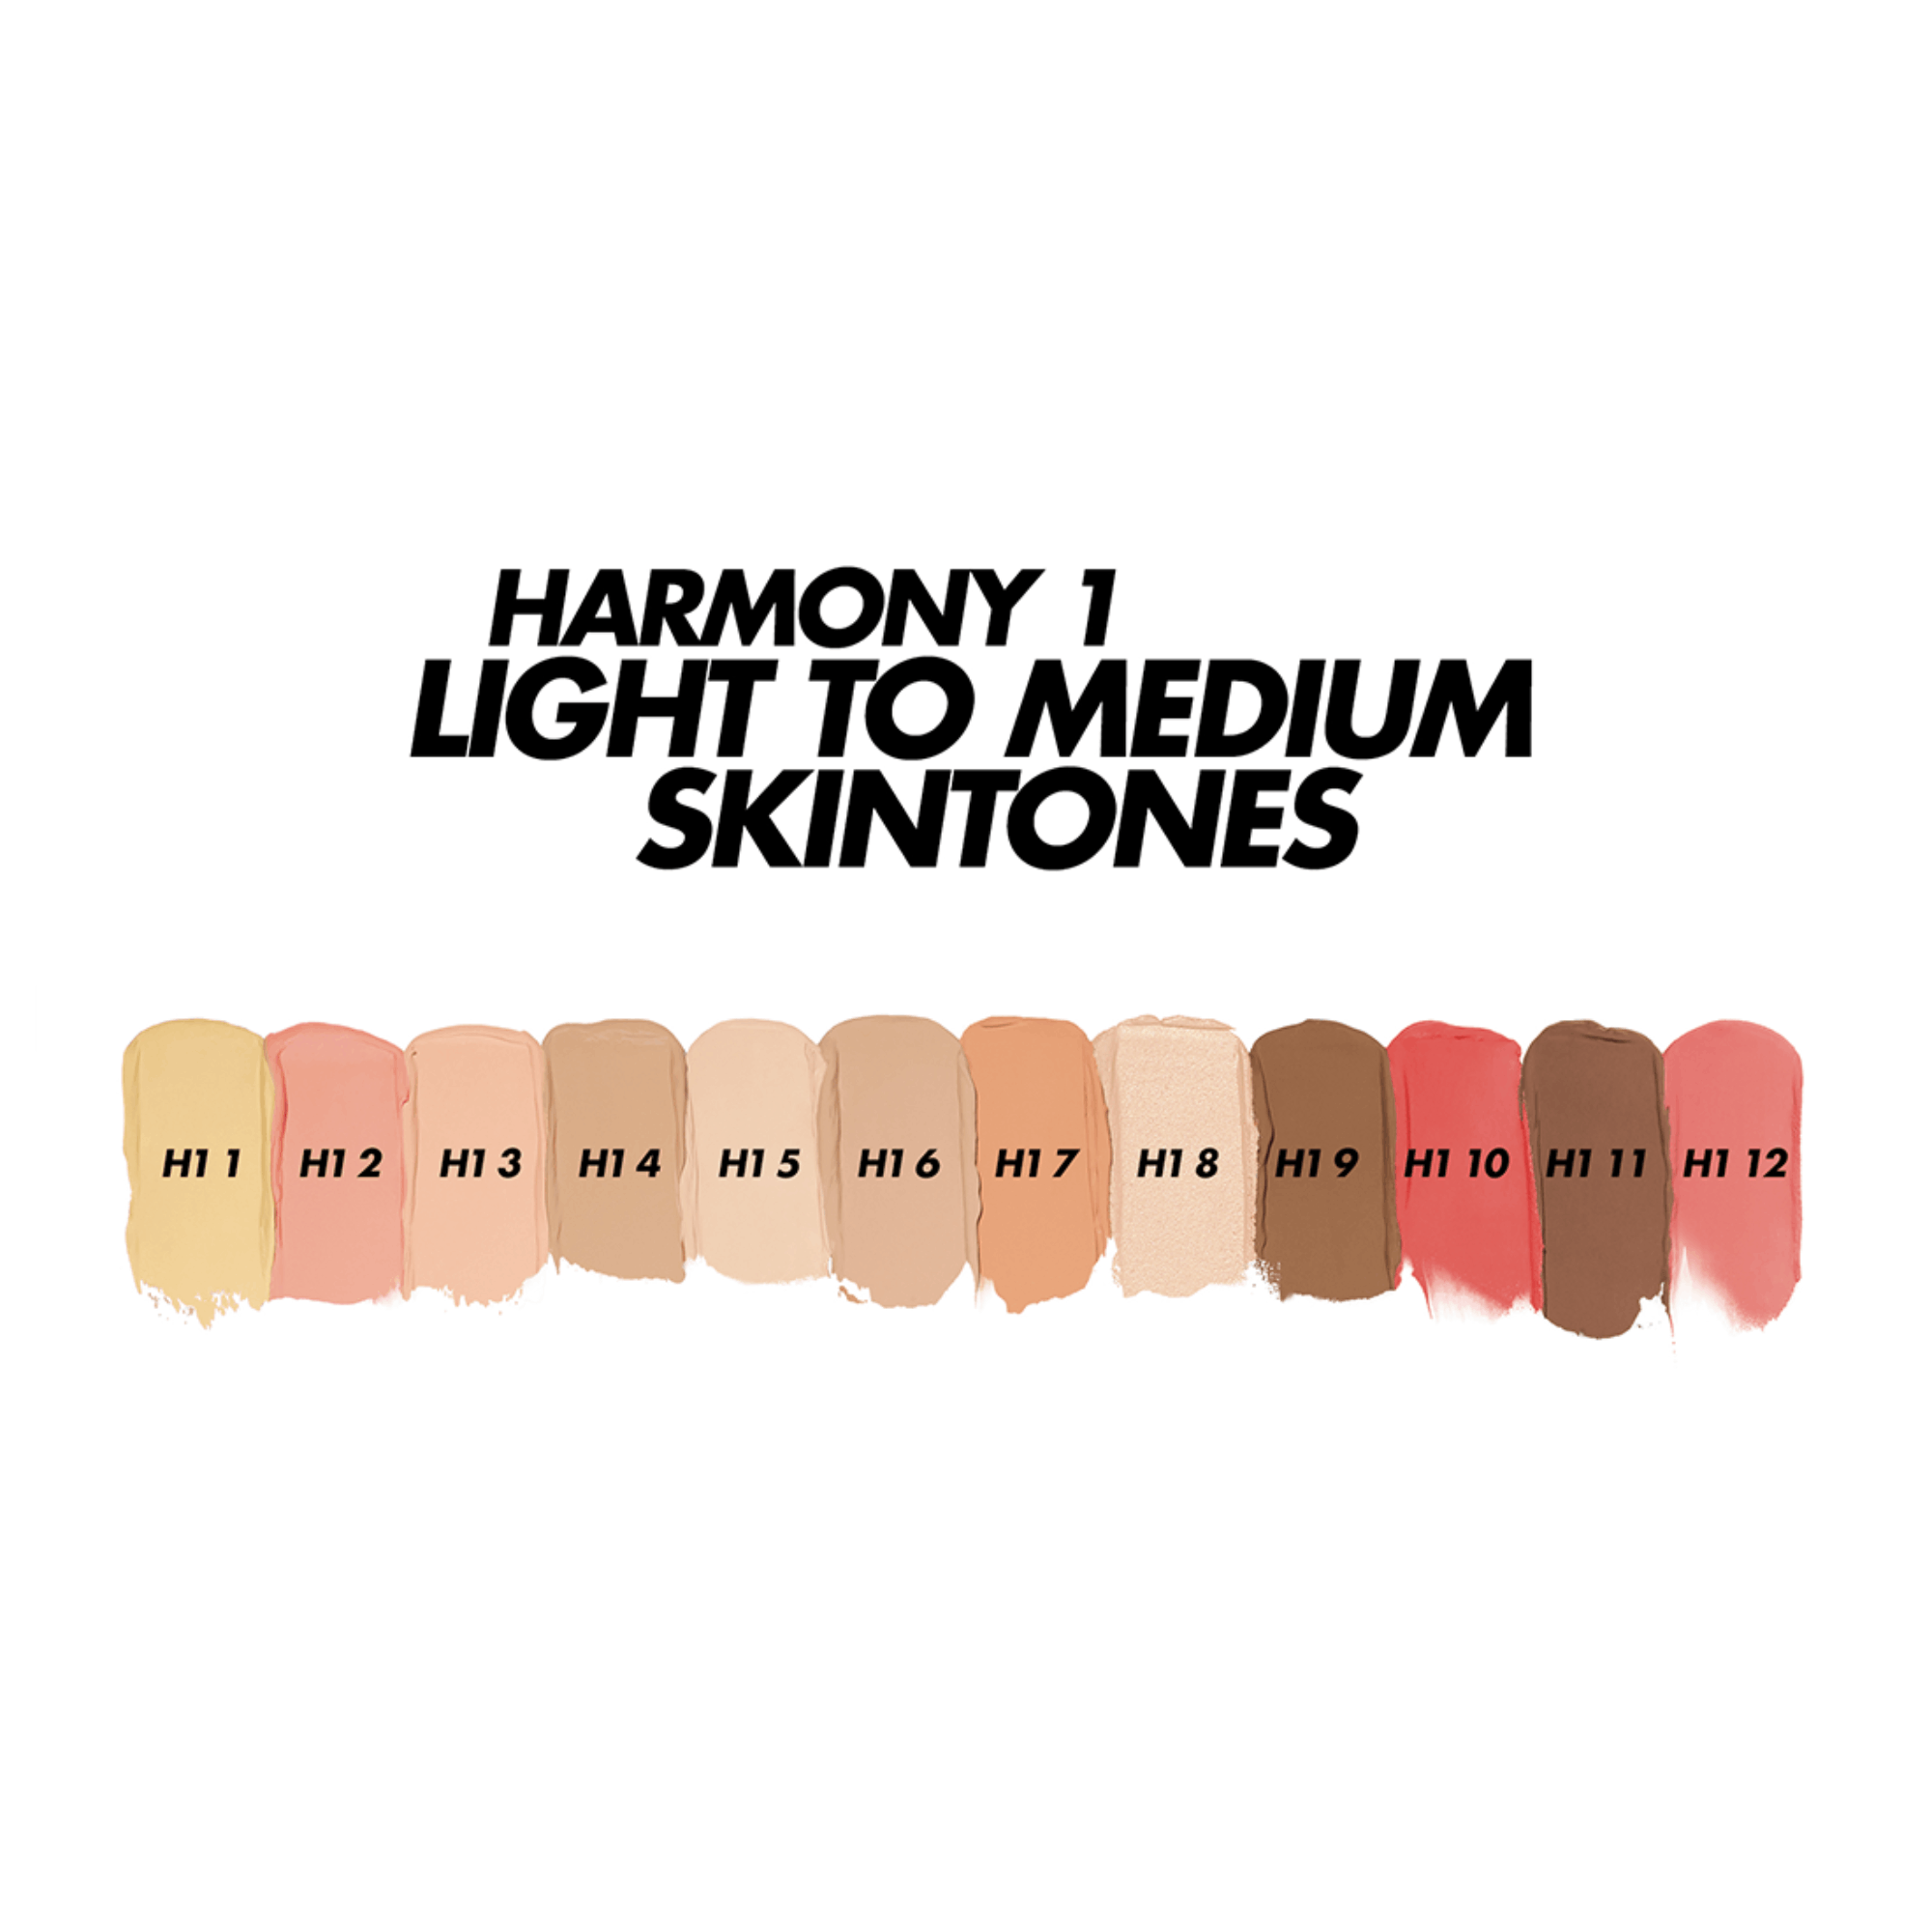 HD SKIN All-In-One Palette - MAKE UP FOR EVER SINGAPORE